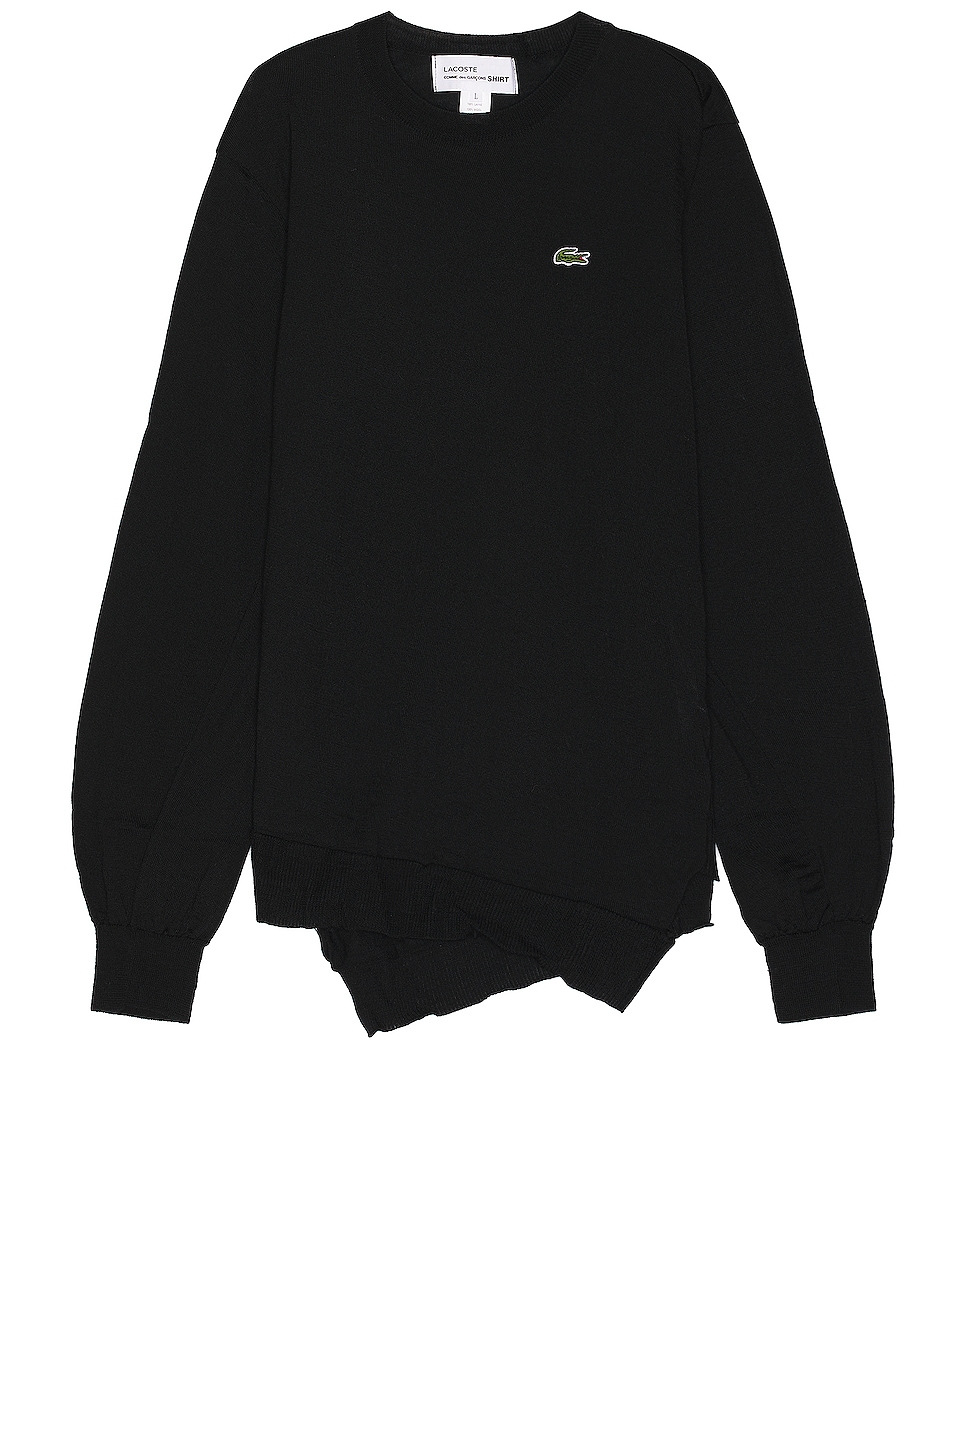 Image 1 of COMME des GARCONS SHIRT X Lacoste Sweater in Black